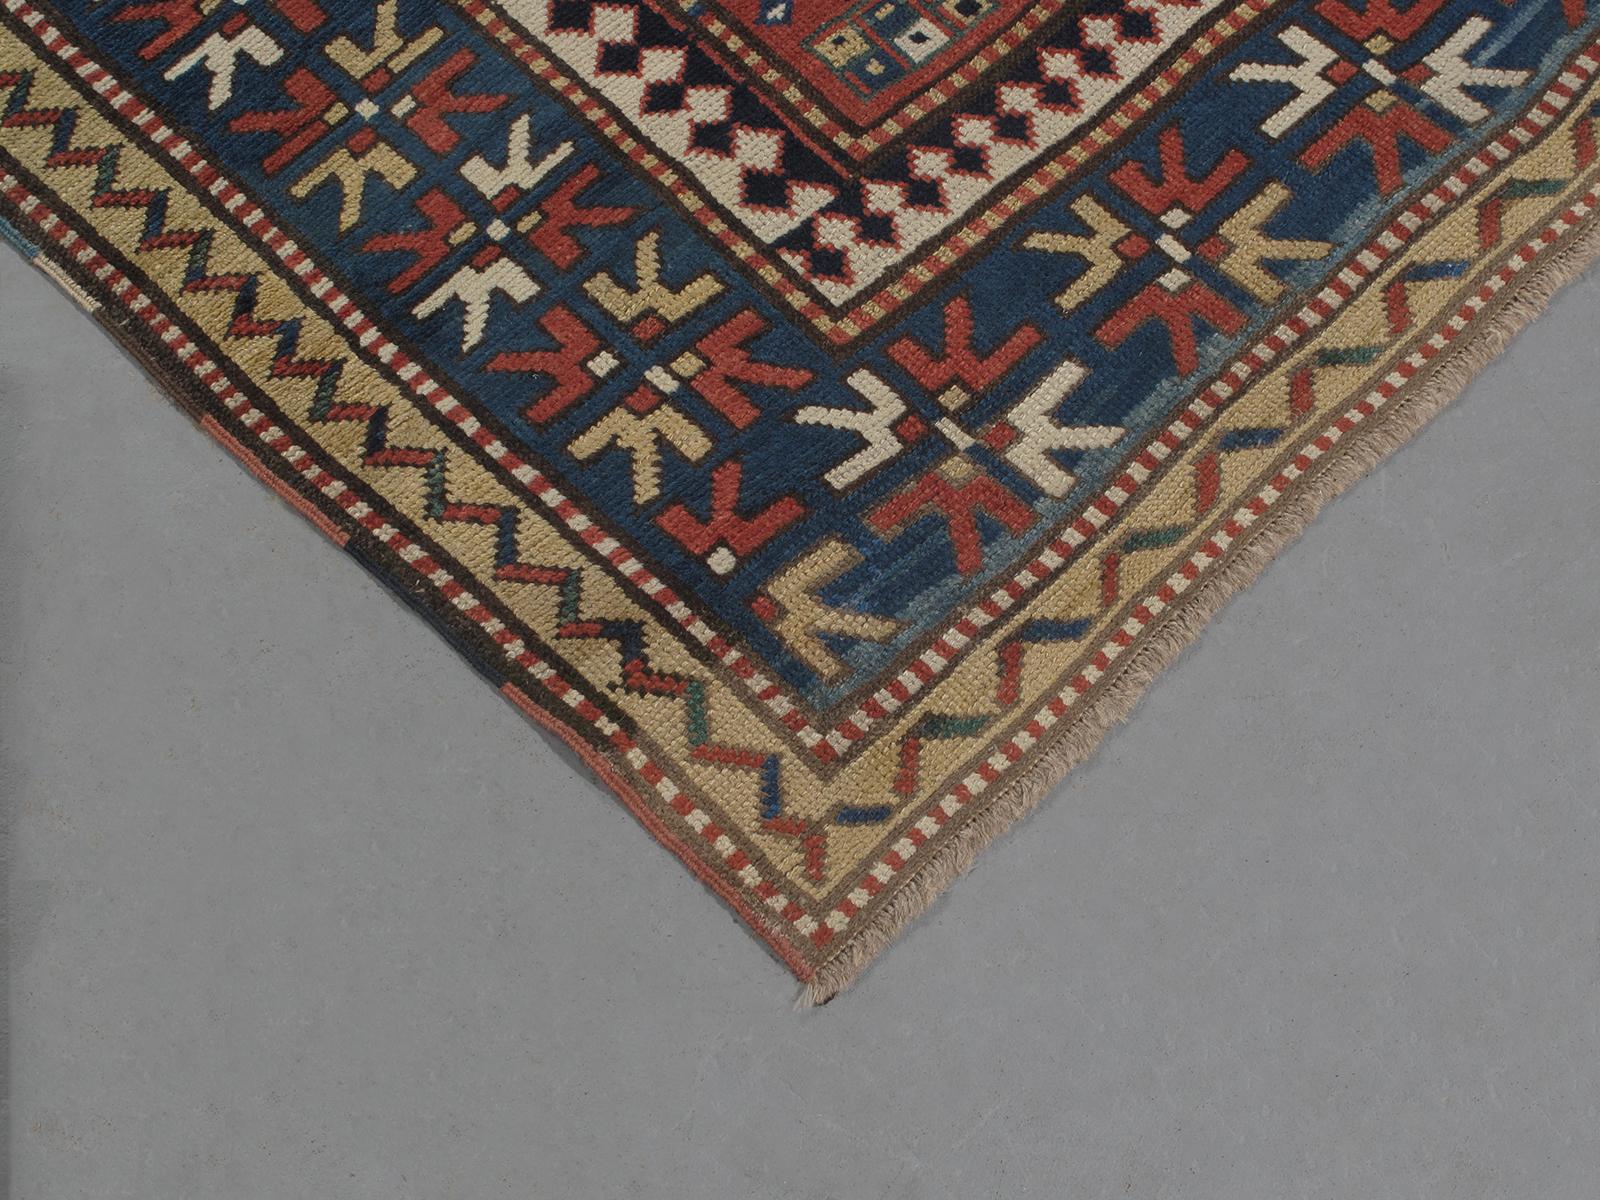 Antique Caucasian Kazak Tribal Rug In Good Condition For Sale In New York, NY